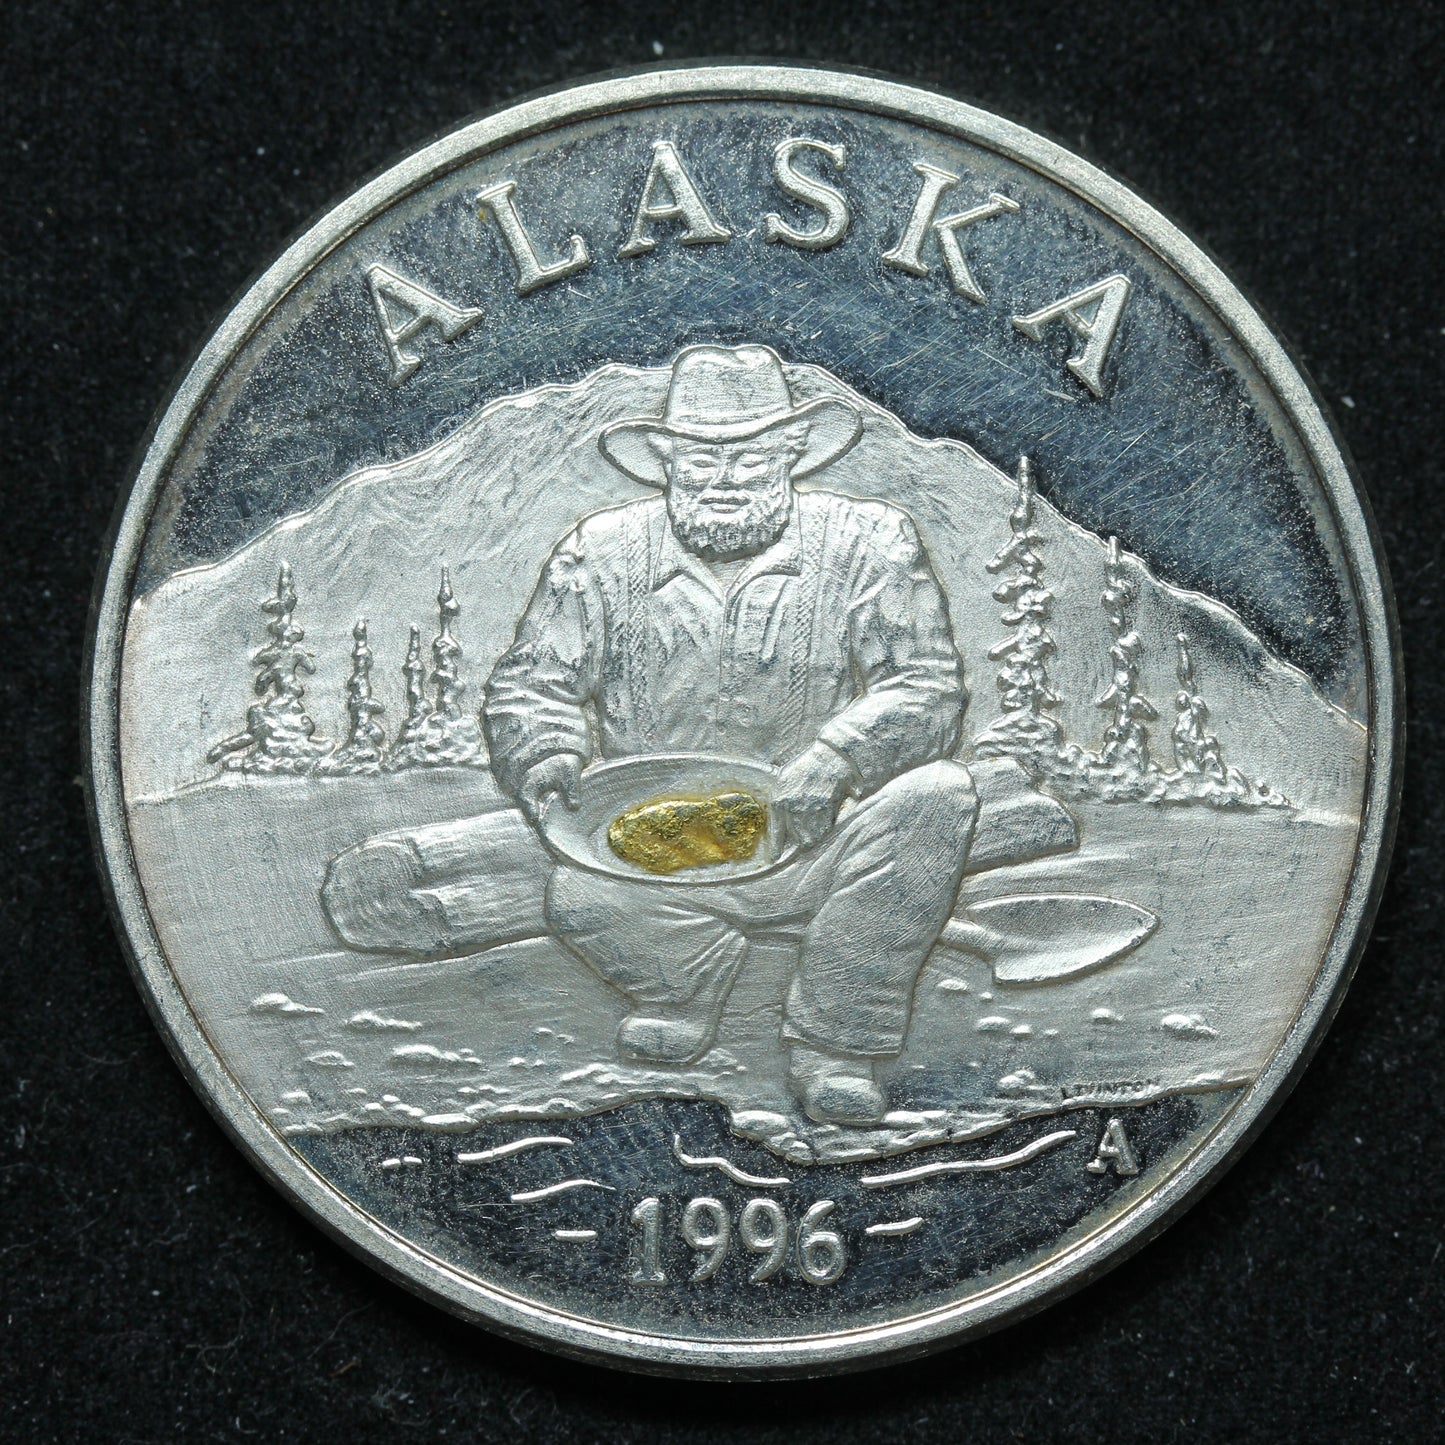 1996 1 oz .999 Fine Silver - The Seal of The State of Alaska Prospector w/ Gold Nugget